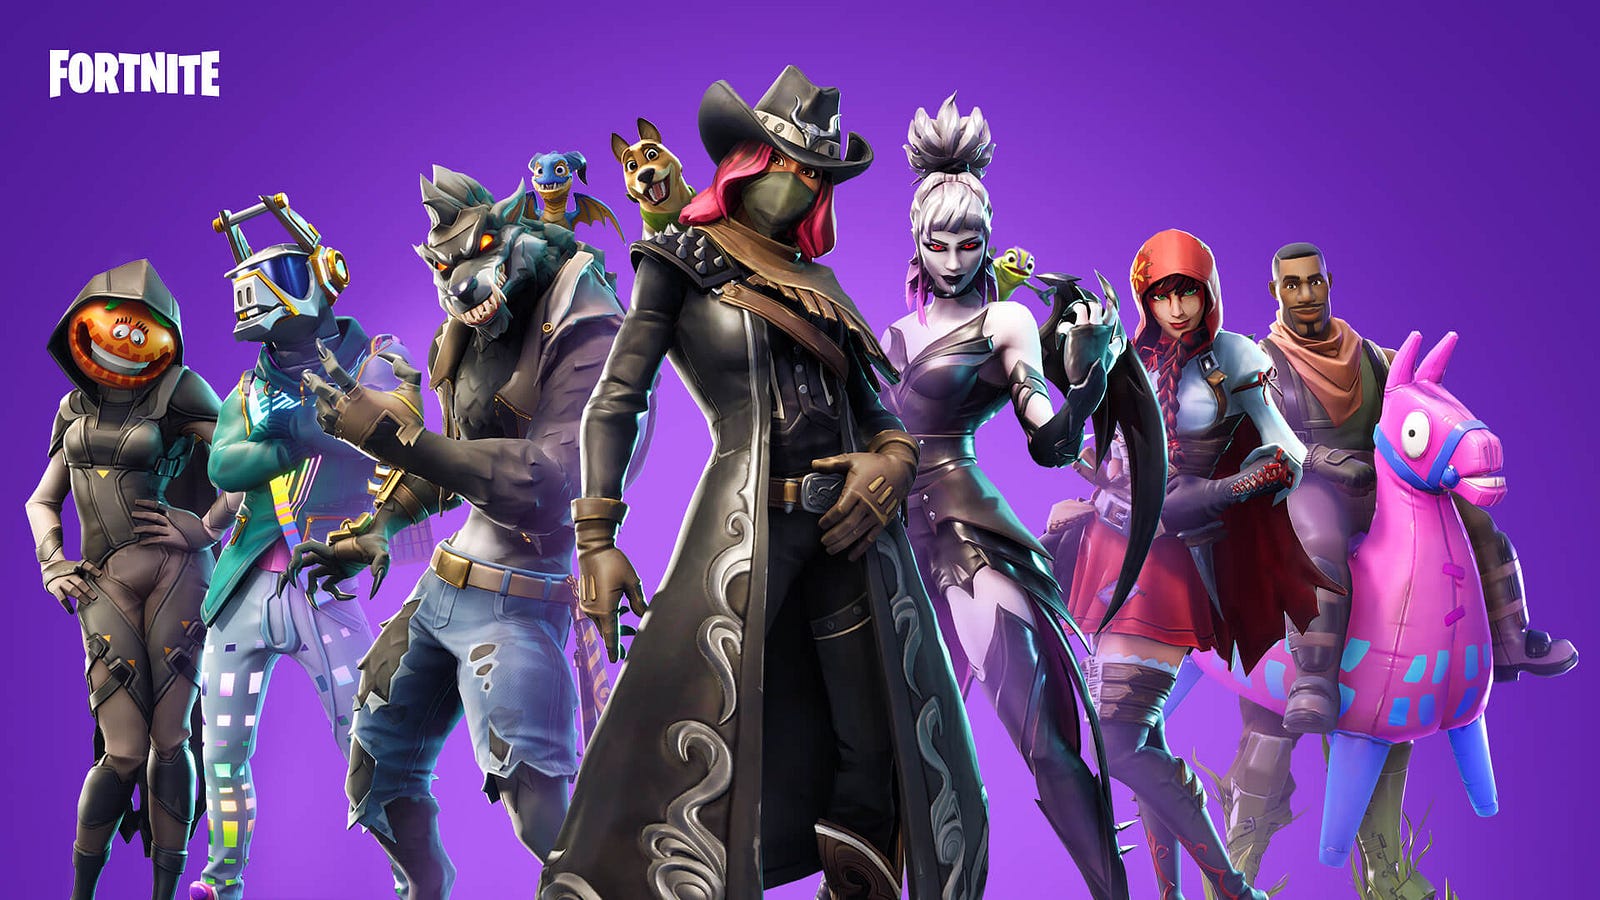 with the release of season 6 on sept 27 the theme so far is halloween the new season brought back one of the rarest skins in the game the skull trooper - rare fortnite characters